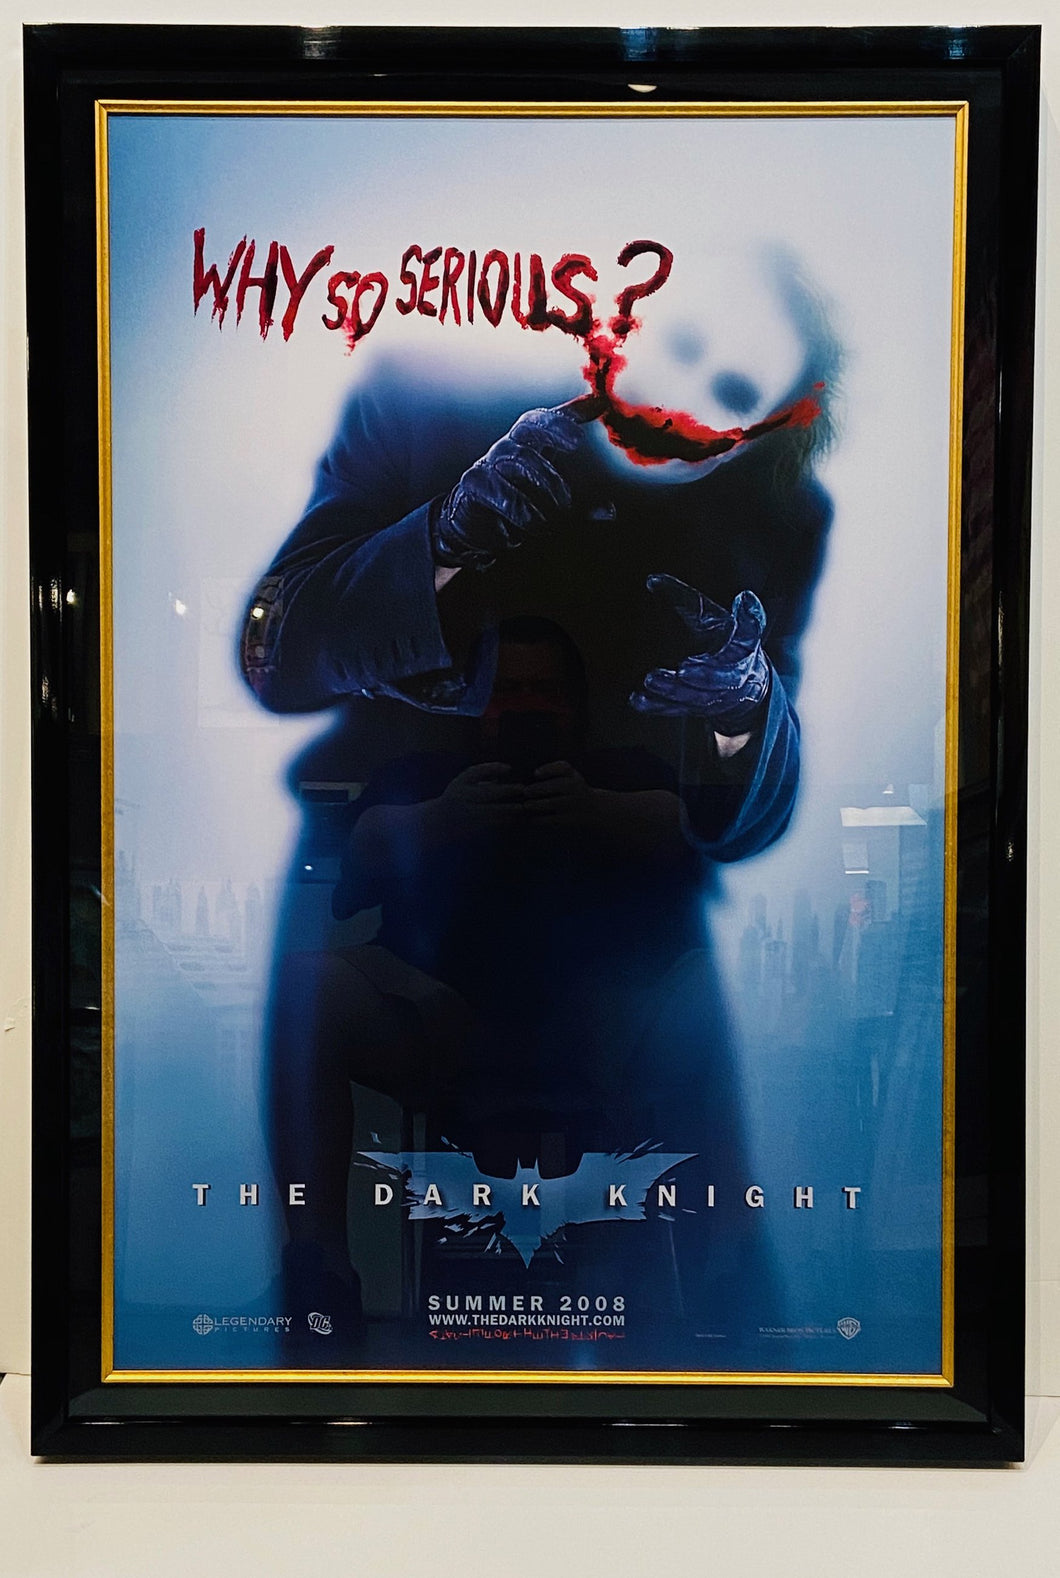 THE DARK KNIGHT - WHY SO SERIOUS? (2008)